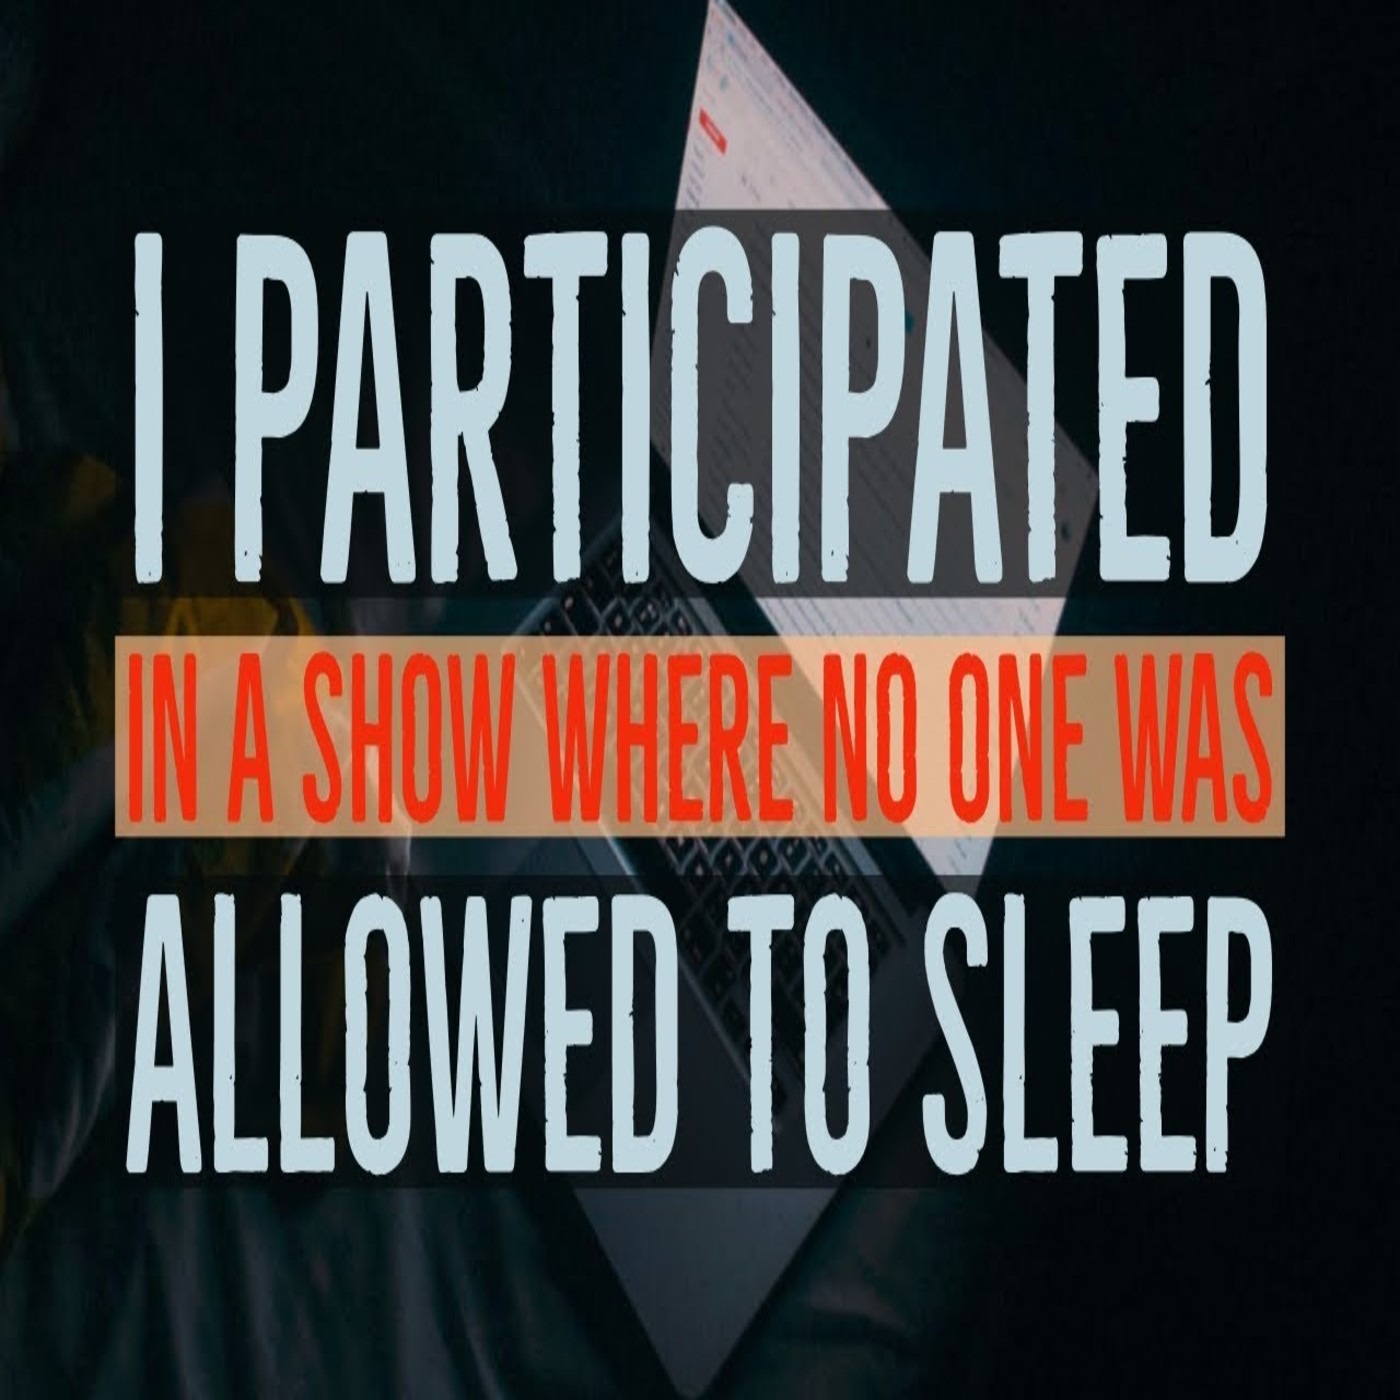 I Participated in a Show where No One was Allowed to Sleep